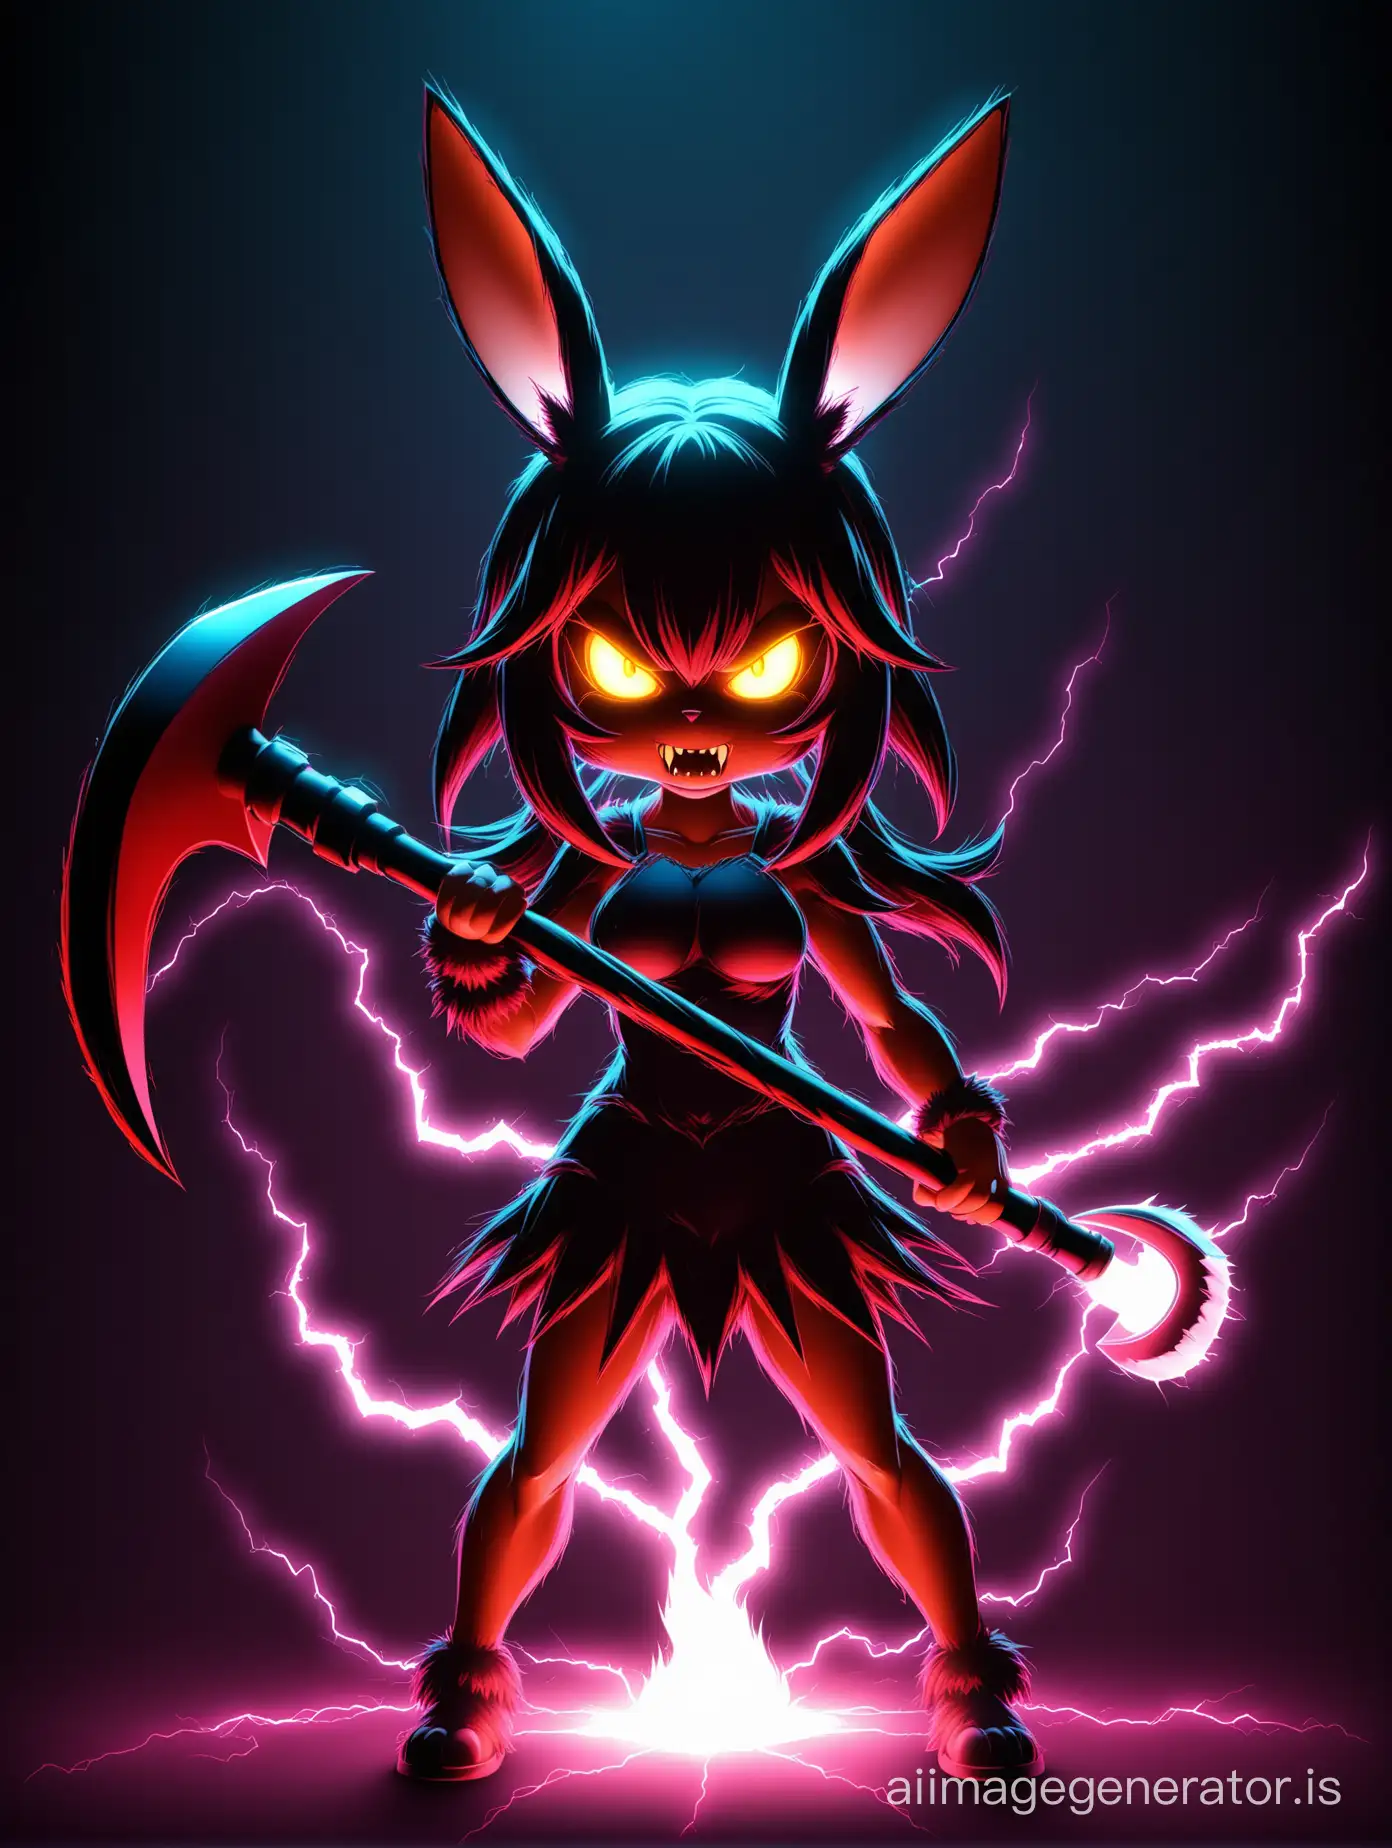 Furious demonic rabbit girl, with big ears, dark colors, an axe in her paw, a tail, glowing eyes, 3D, drawing, HD, proportionality, vector, illustration, fantasy, anime. Glowing dark background, bright flashes, lightning.